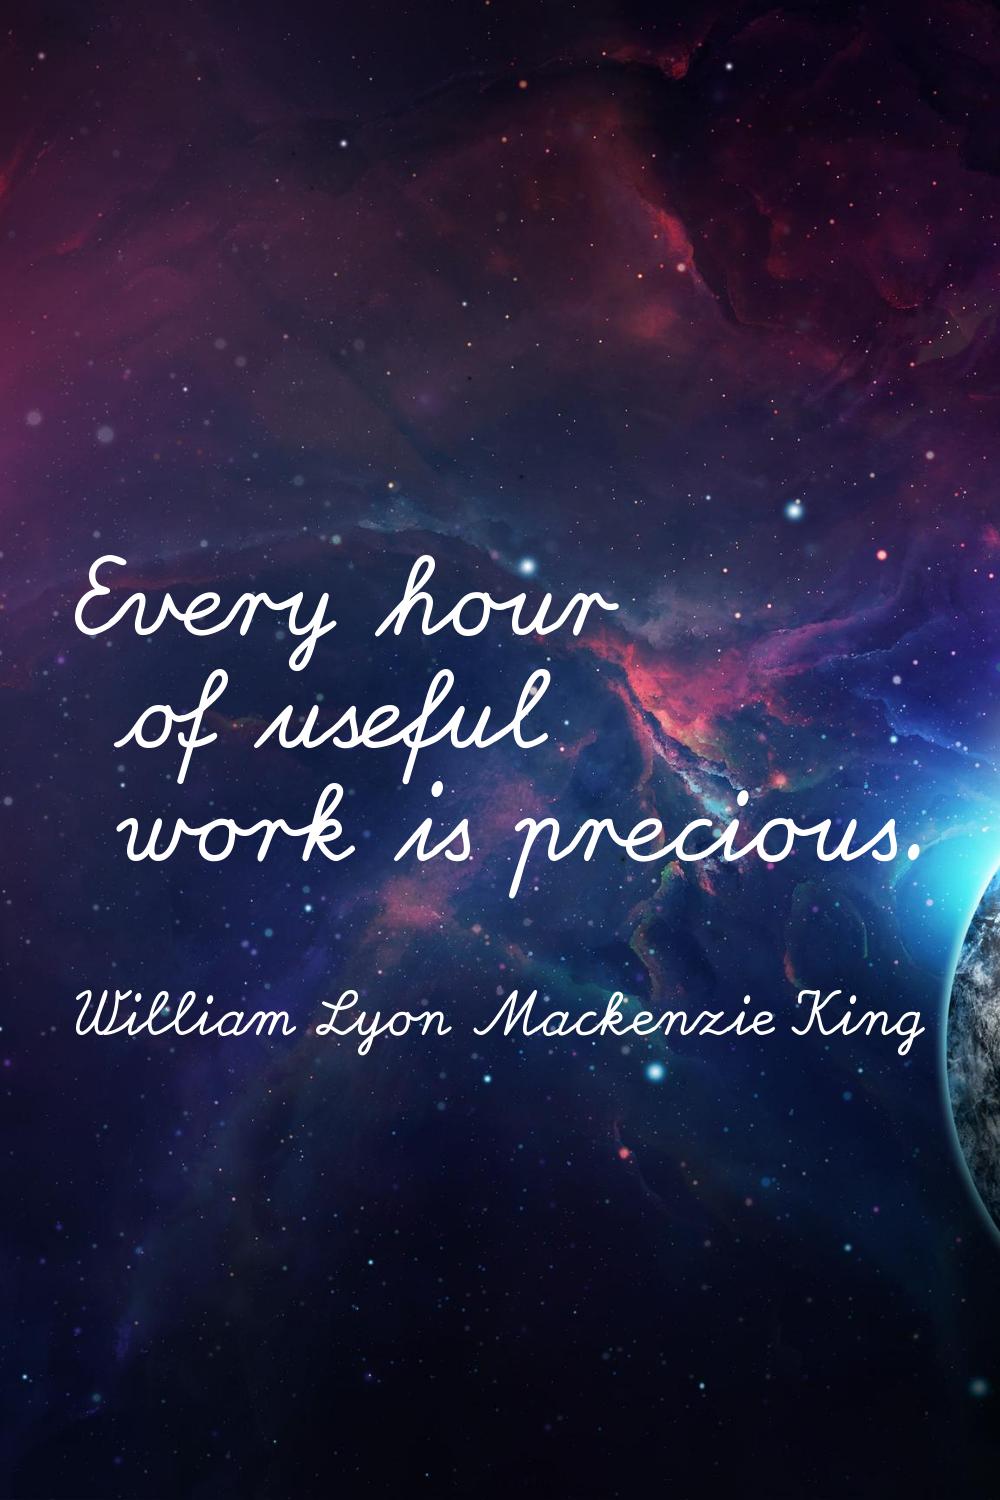 Every hour of useful work is precious.